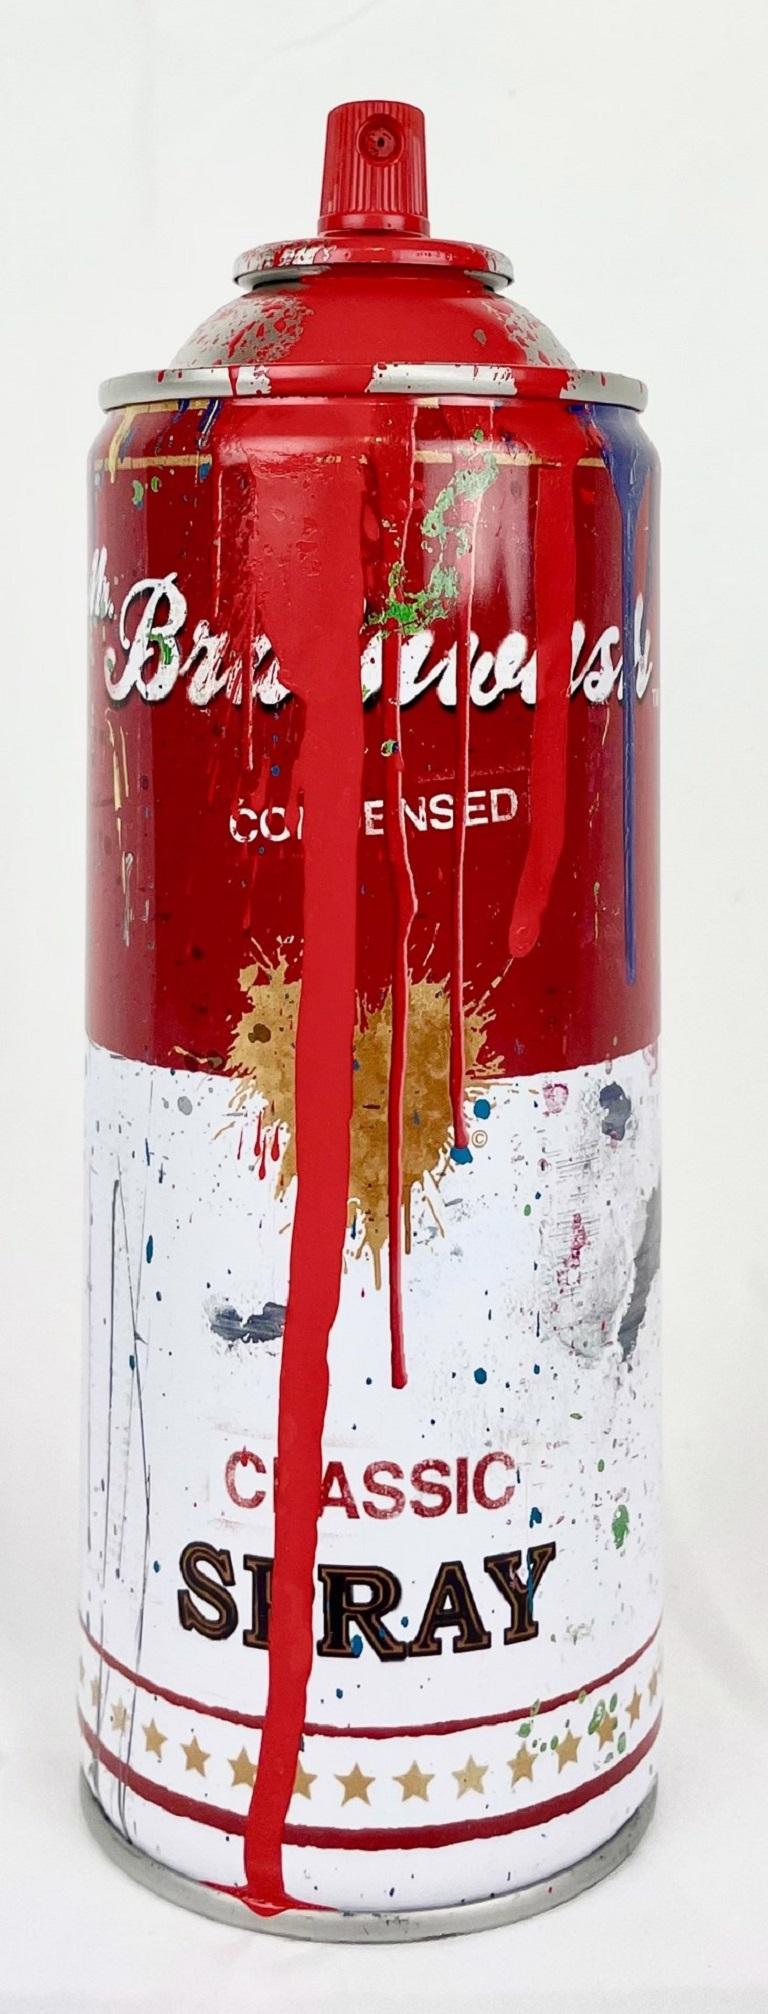 Campbells Soup Hand-Finished Spray Can - Sculpture by Mr. Brainwash